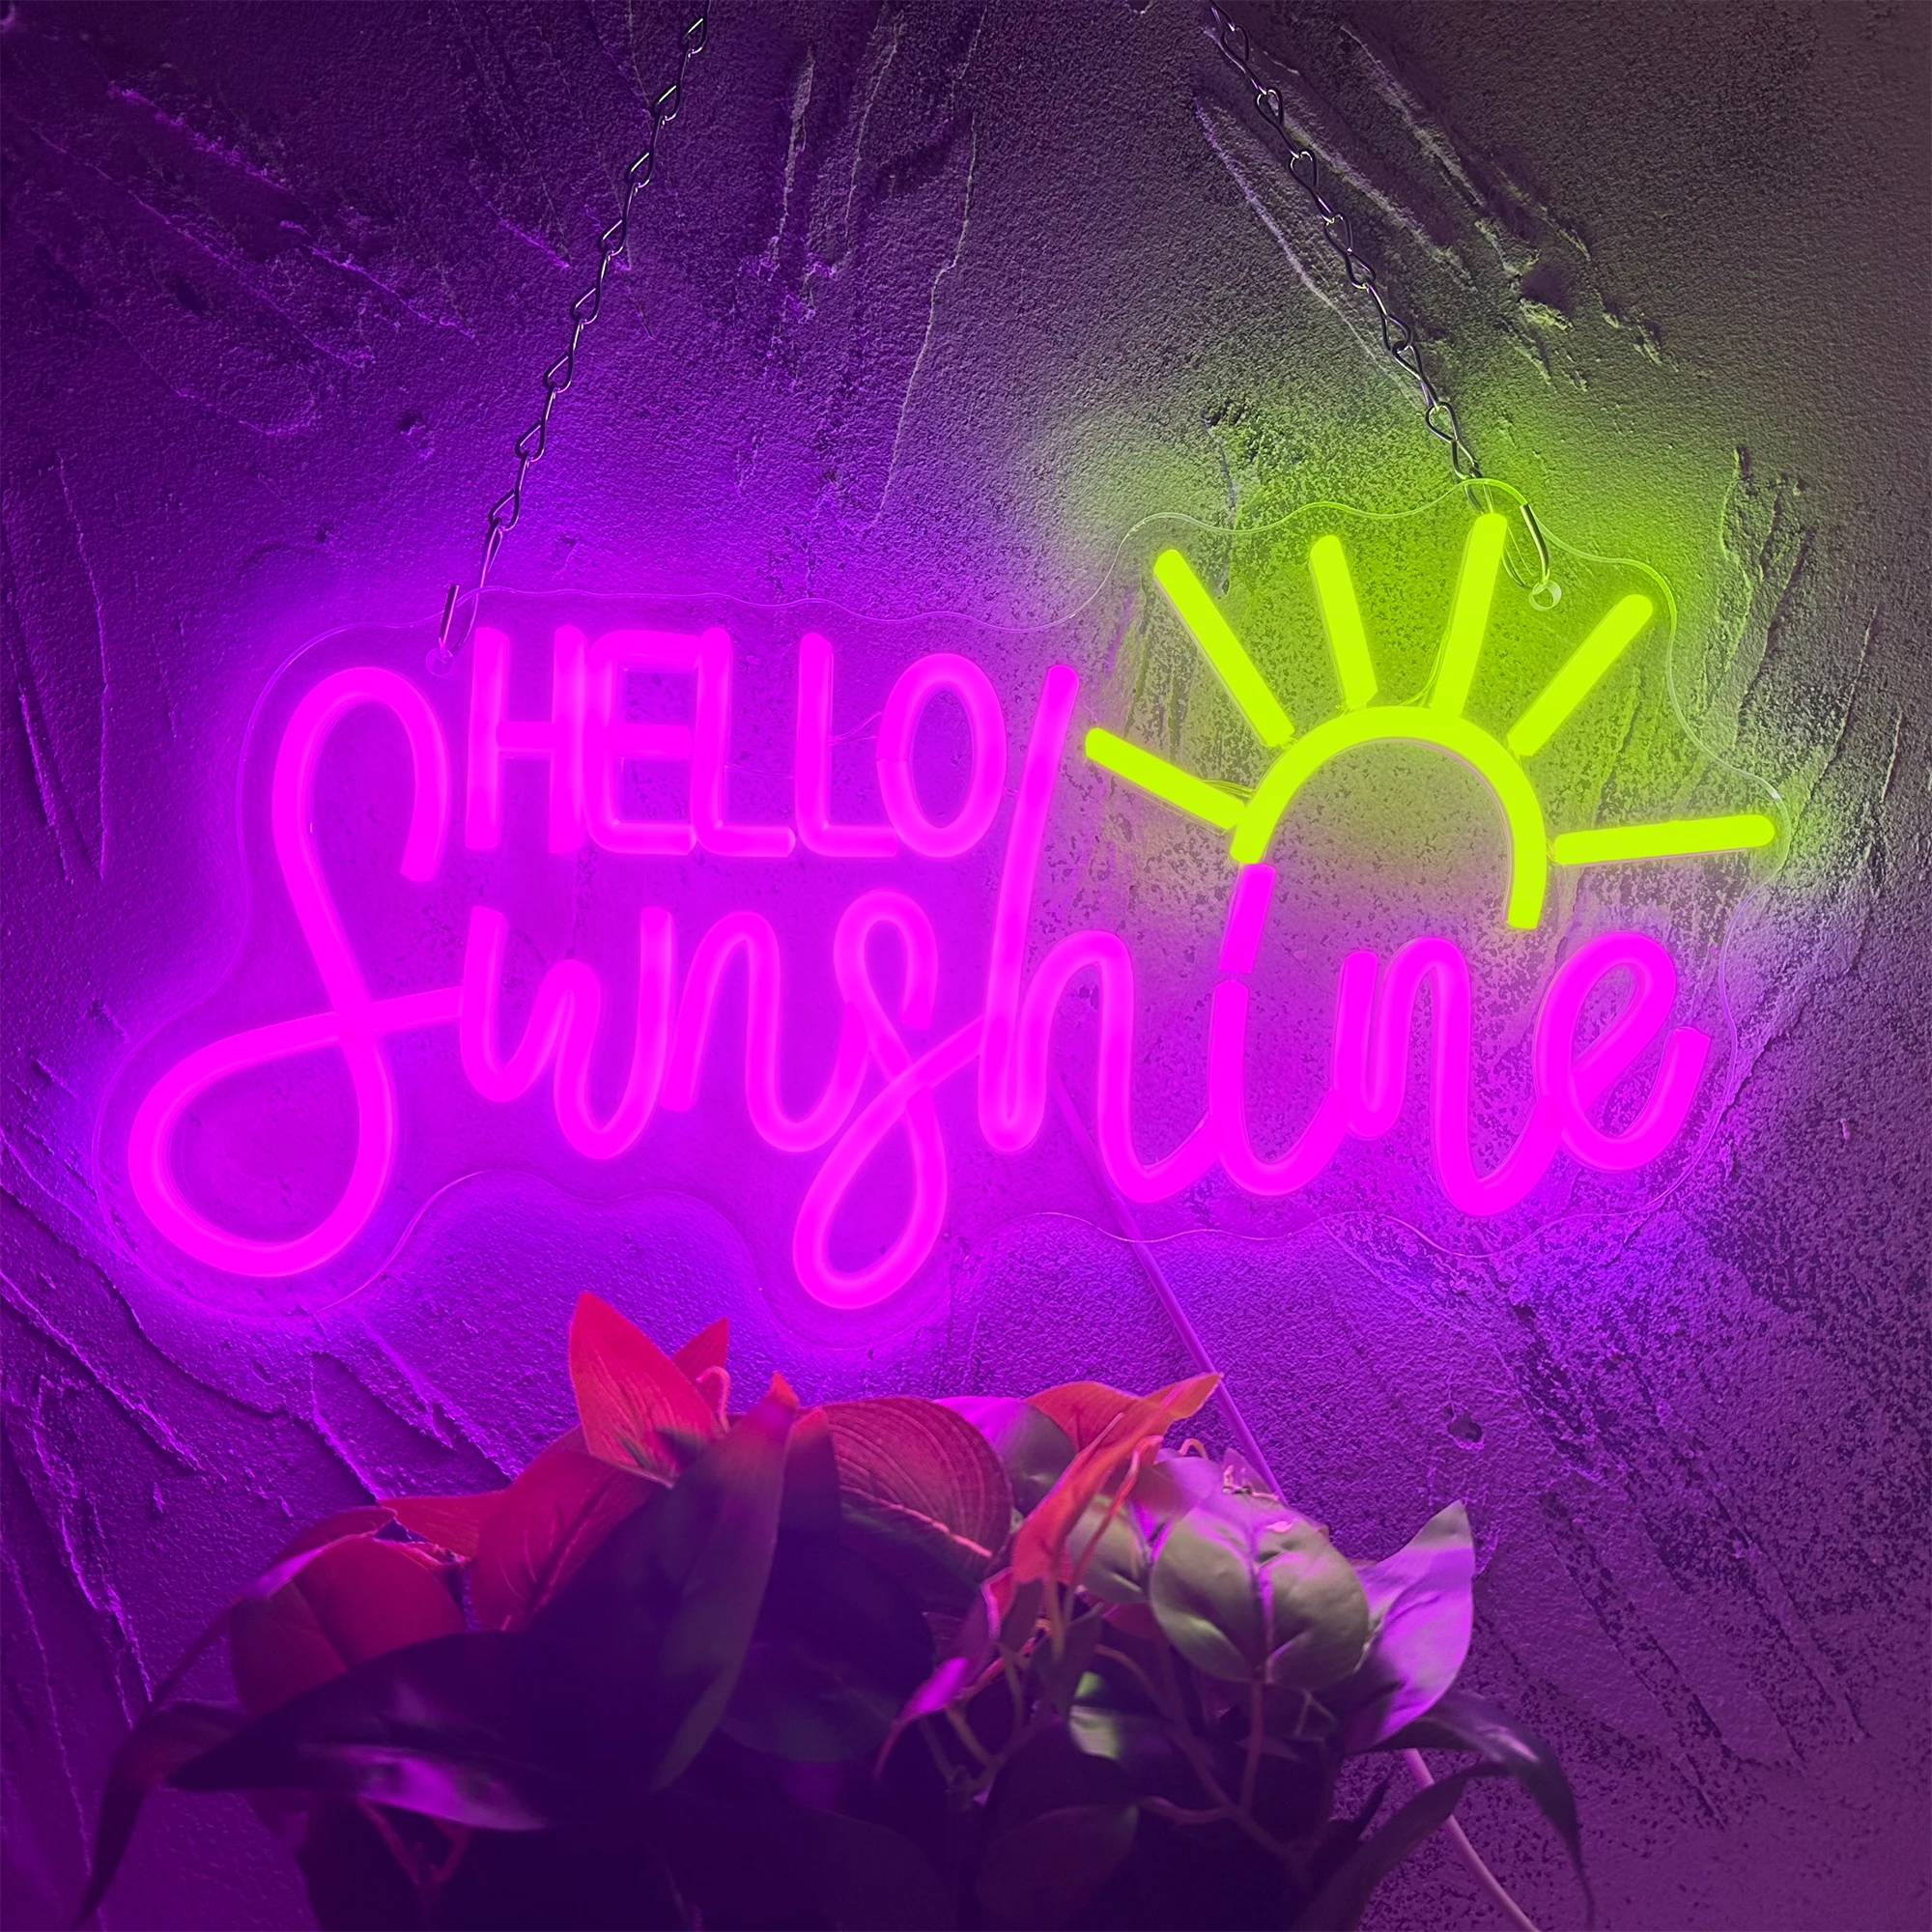 

Hello Sunshine Neon Sign Wall Decor Led Light up Sign Powed by USB for Bedroom Office Home Bar Party Valentines Day Gift